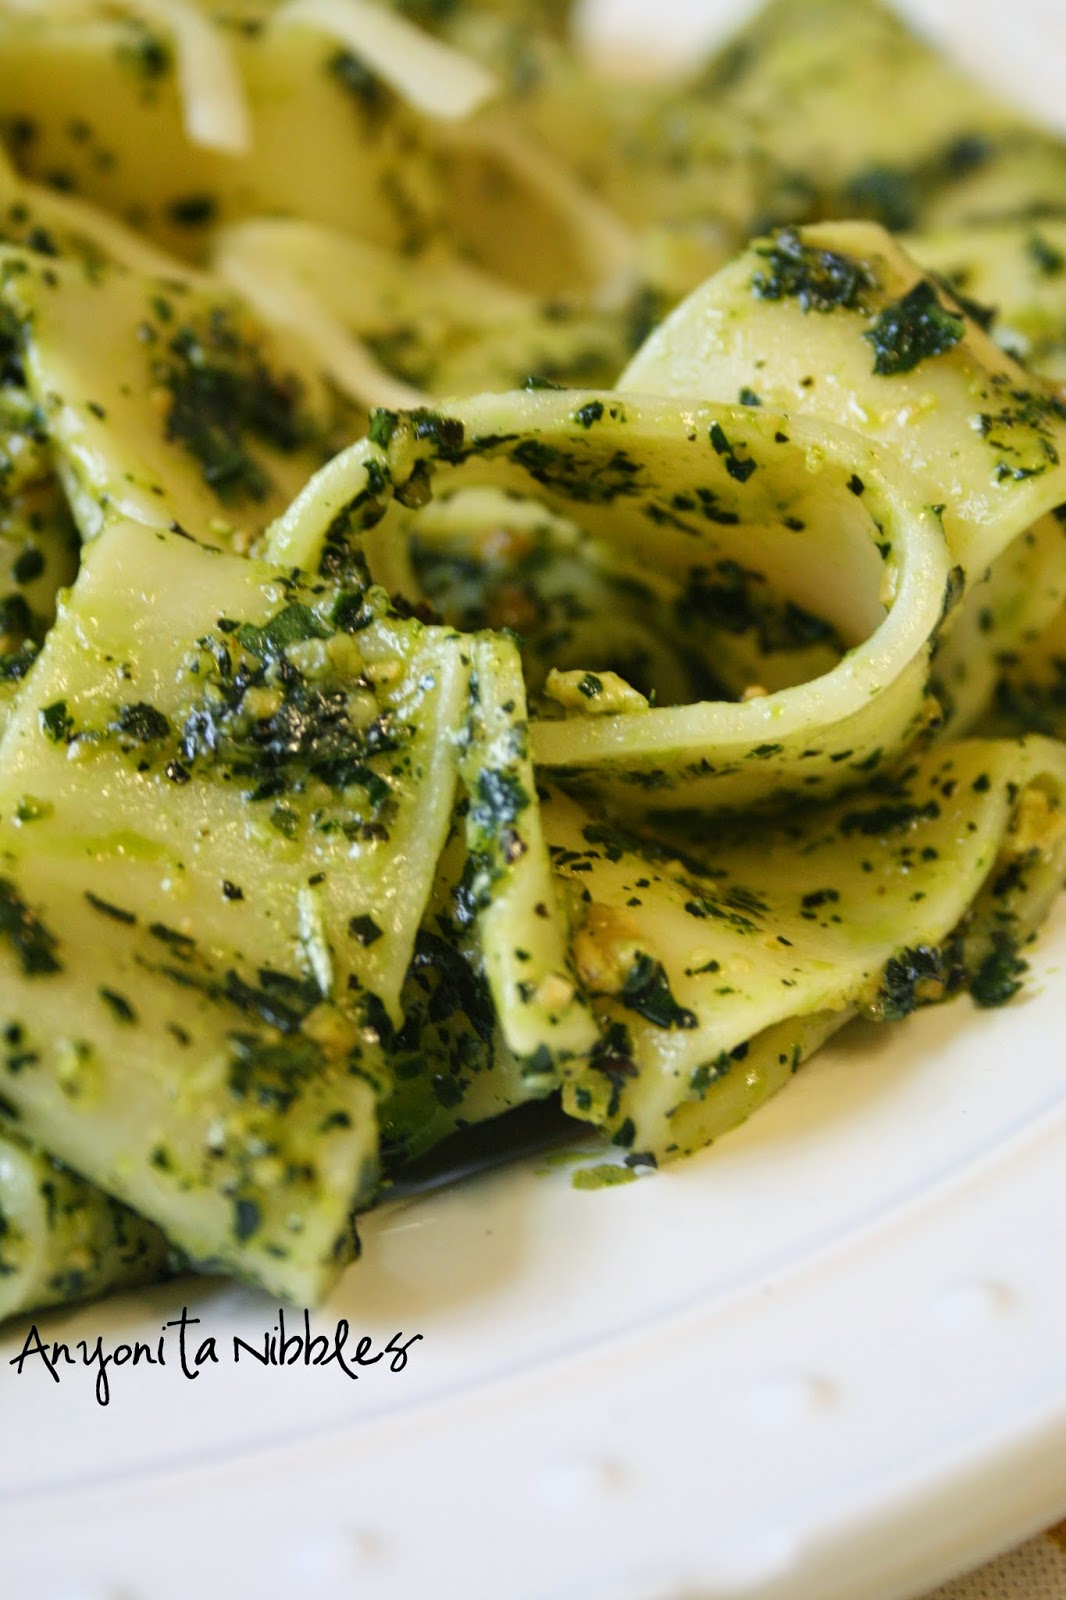 The slighty chunky texture of the kale and cashew pesto adds texture to a plate of soft pasta.